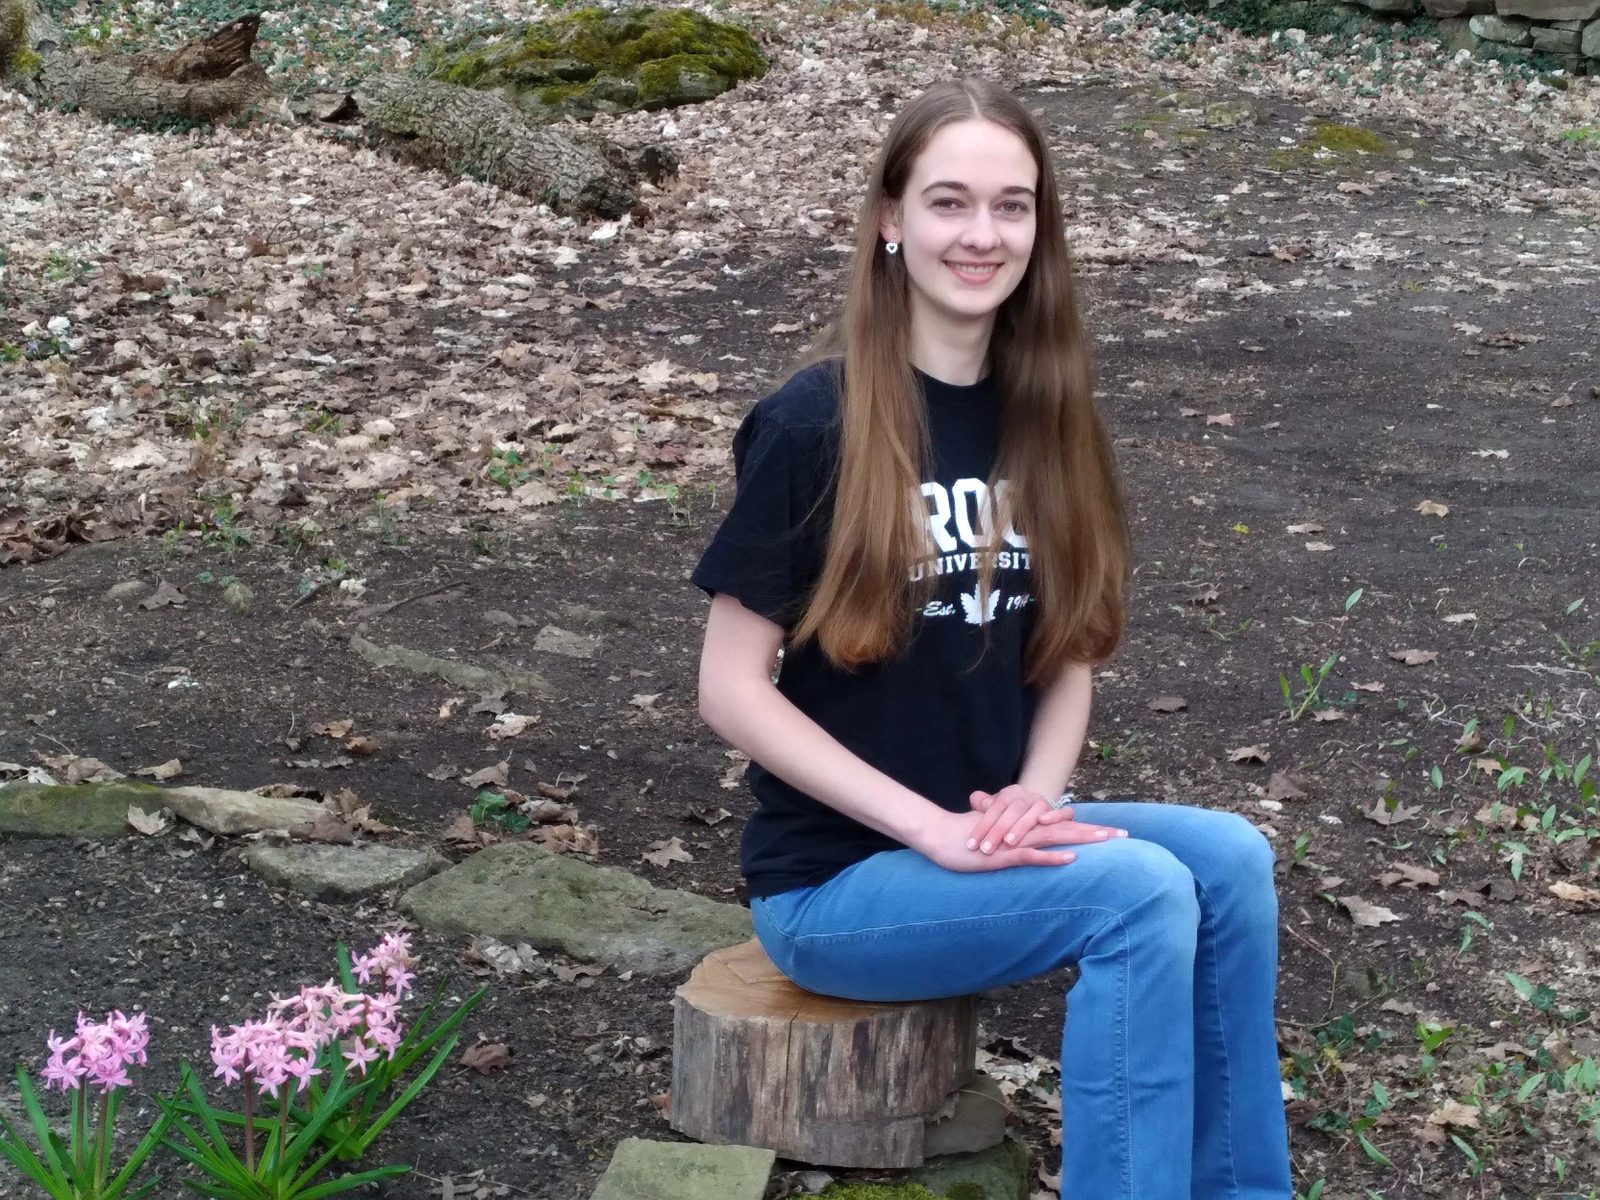 A woman sits on a wooden tree stump in an outdoor setting.